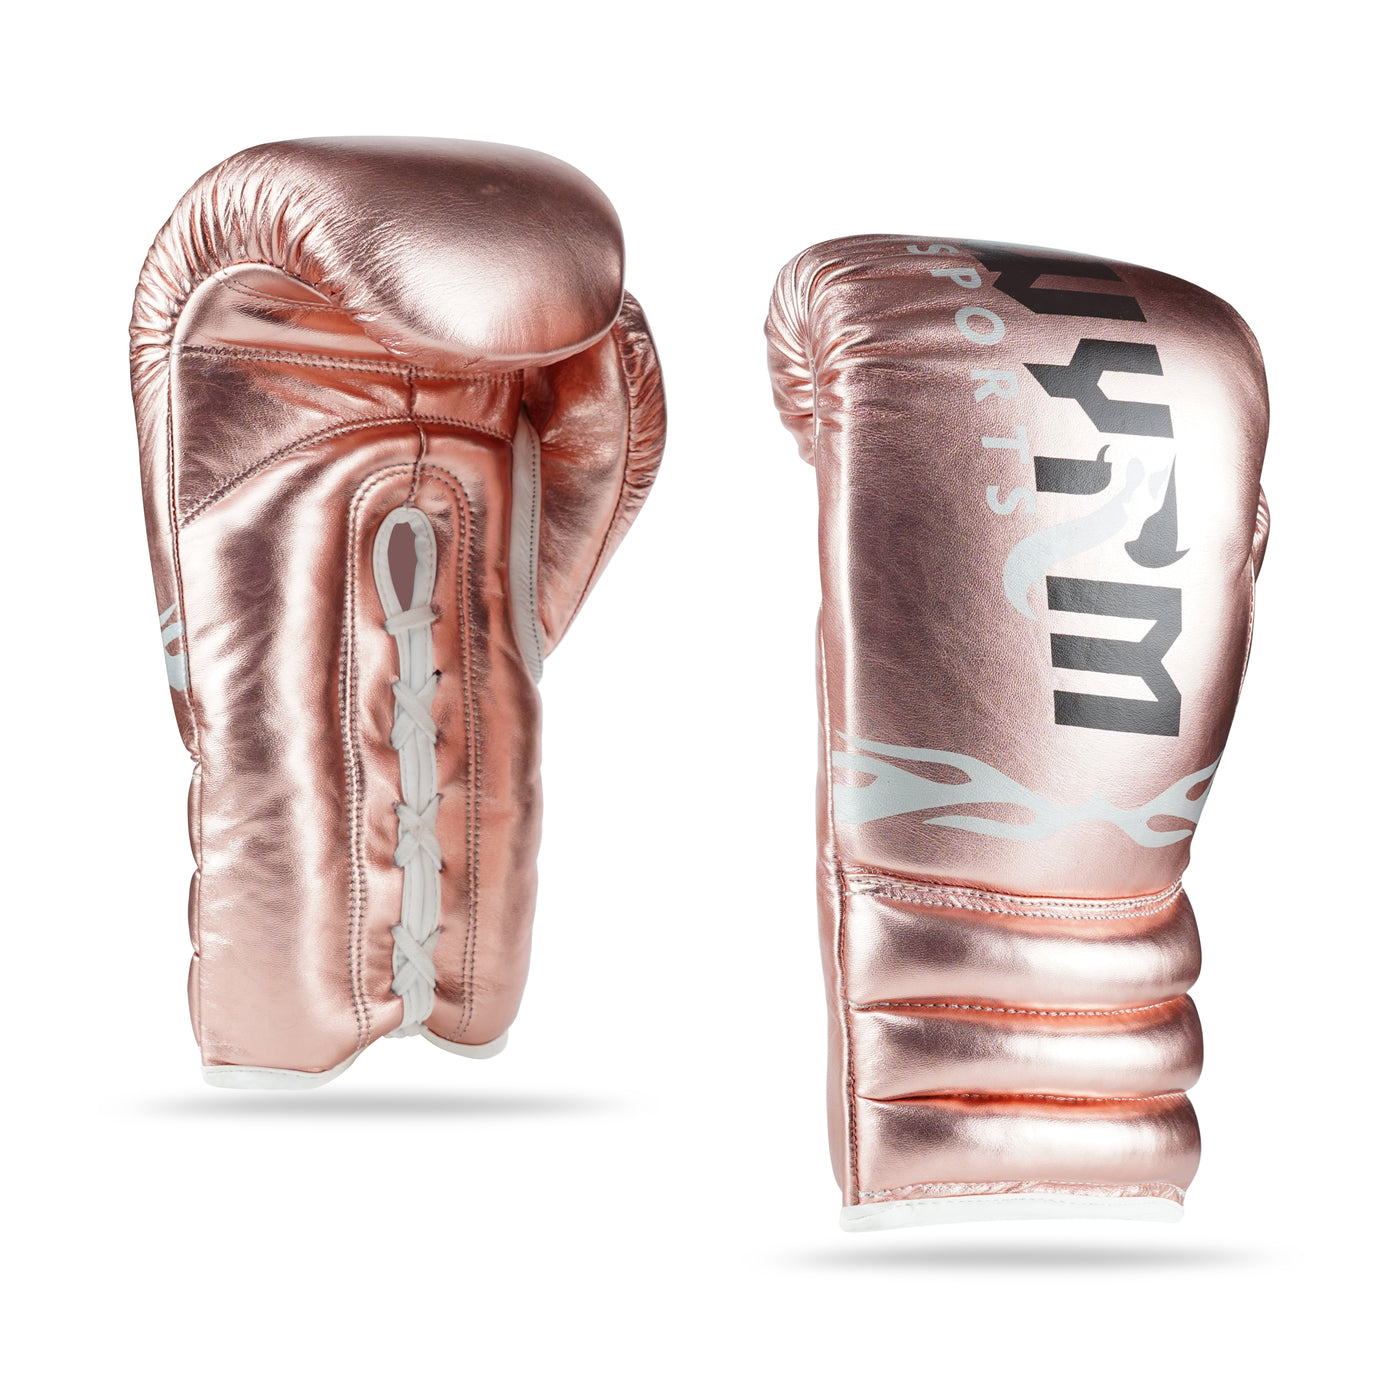 WYRM Deluxe Rose Gold Pro Boxing Genuine Leather Gloves